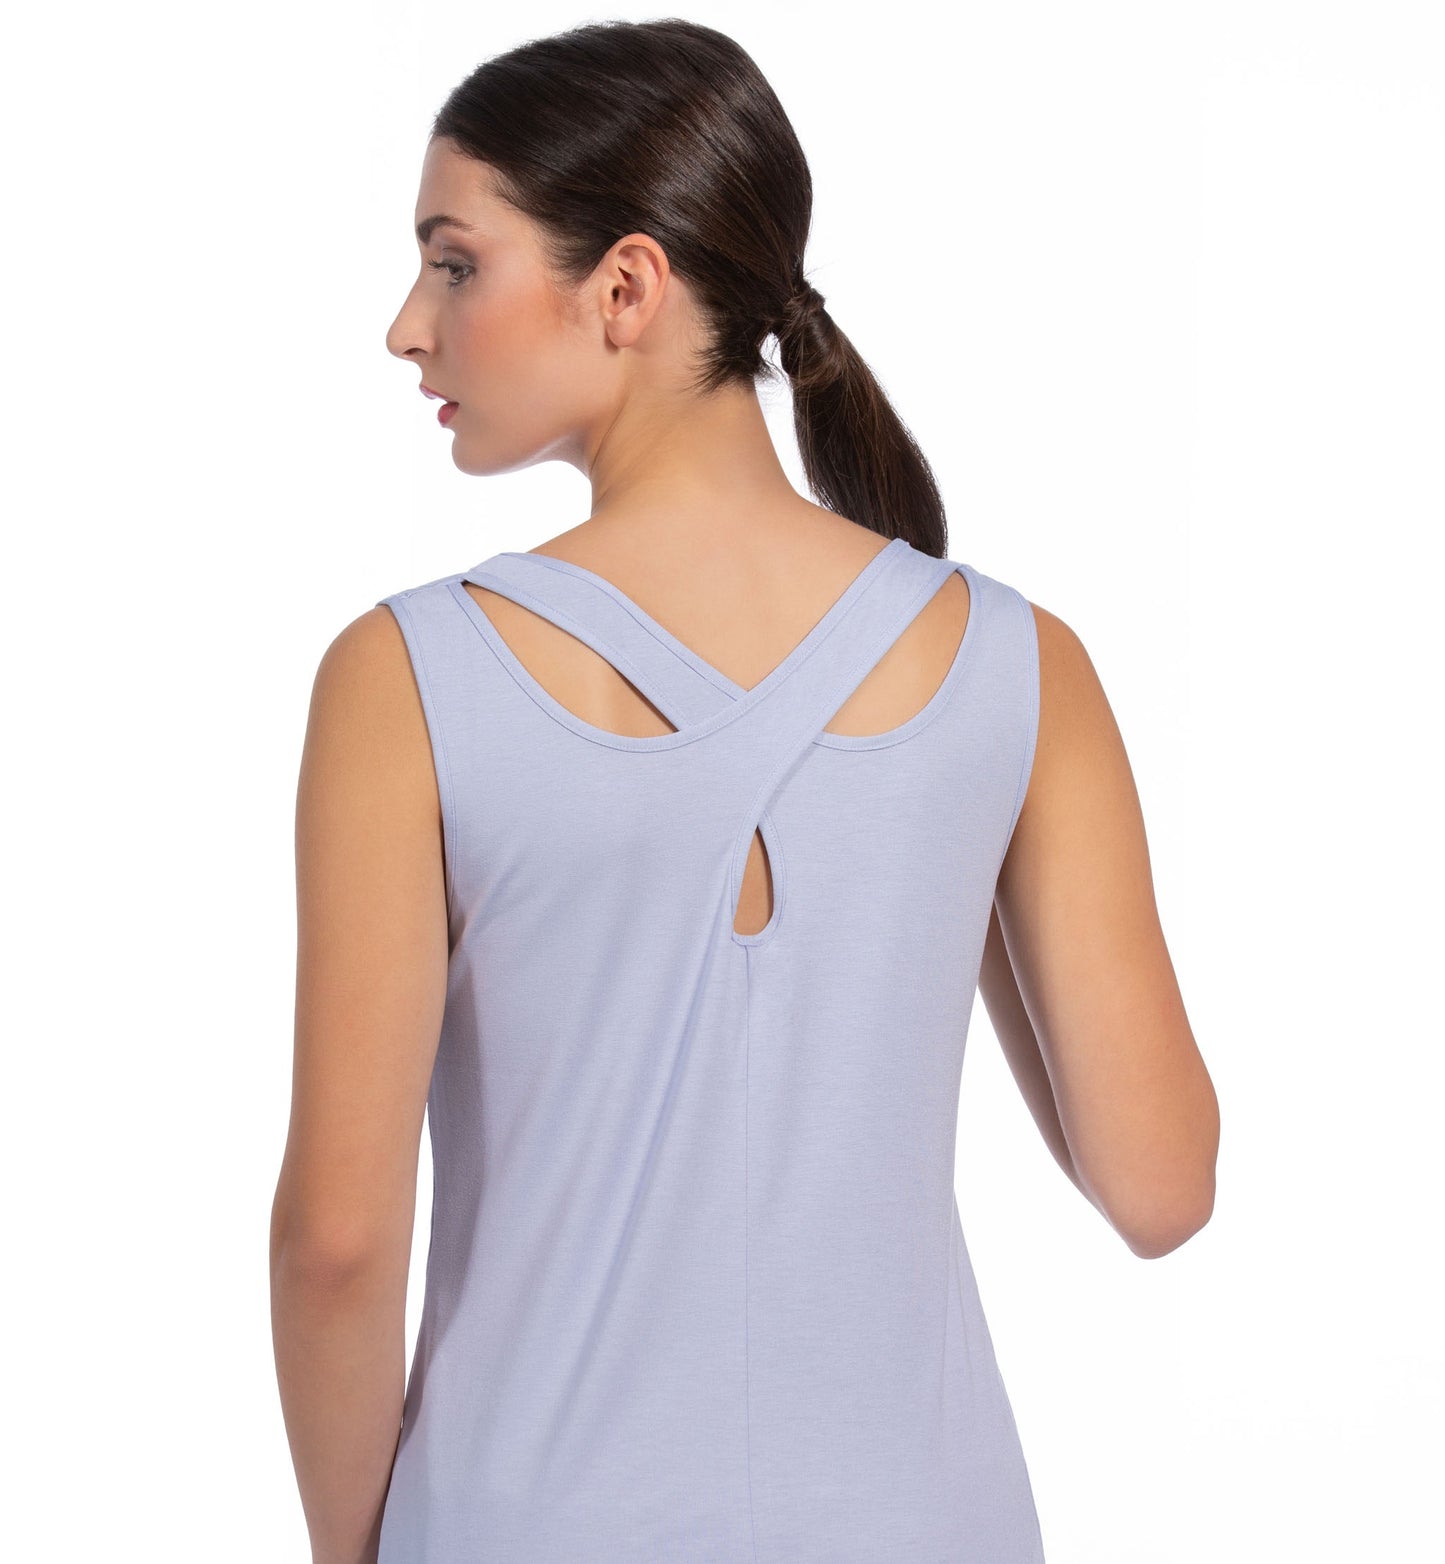 This Viscose line EGi dress from Italy boasts an ultra-soft, stretchy fabric with a silken look, as well as tasteful, sophisticated cross-back straps. 